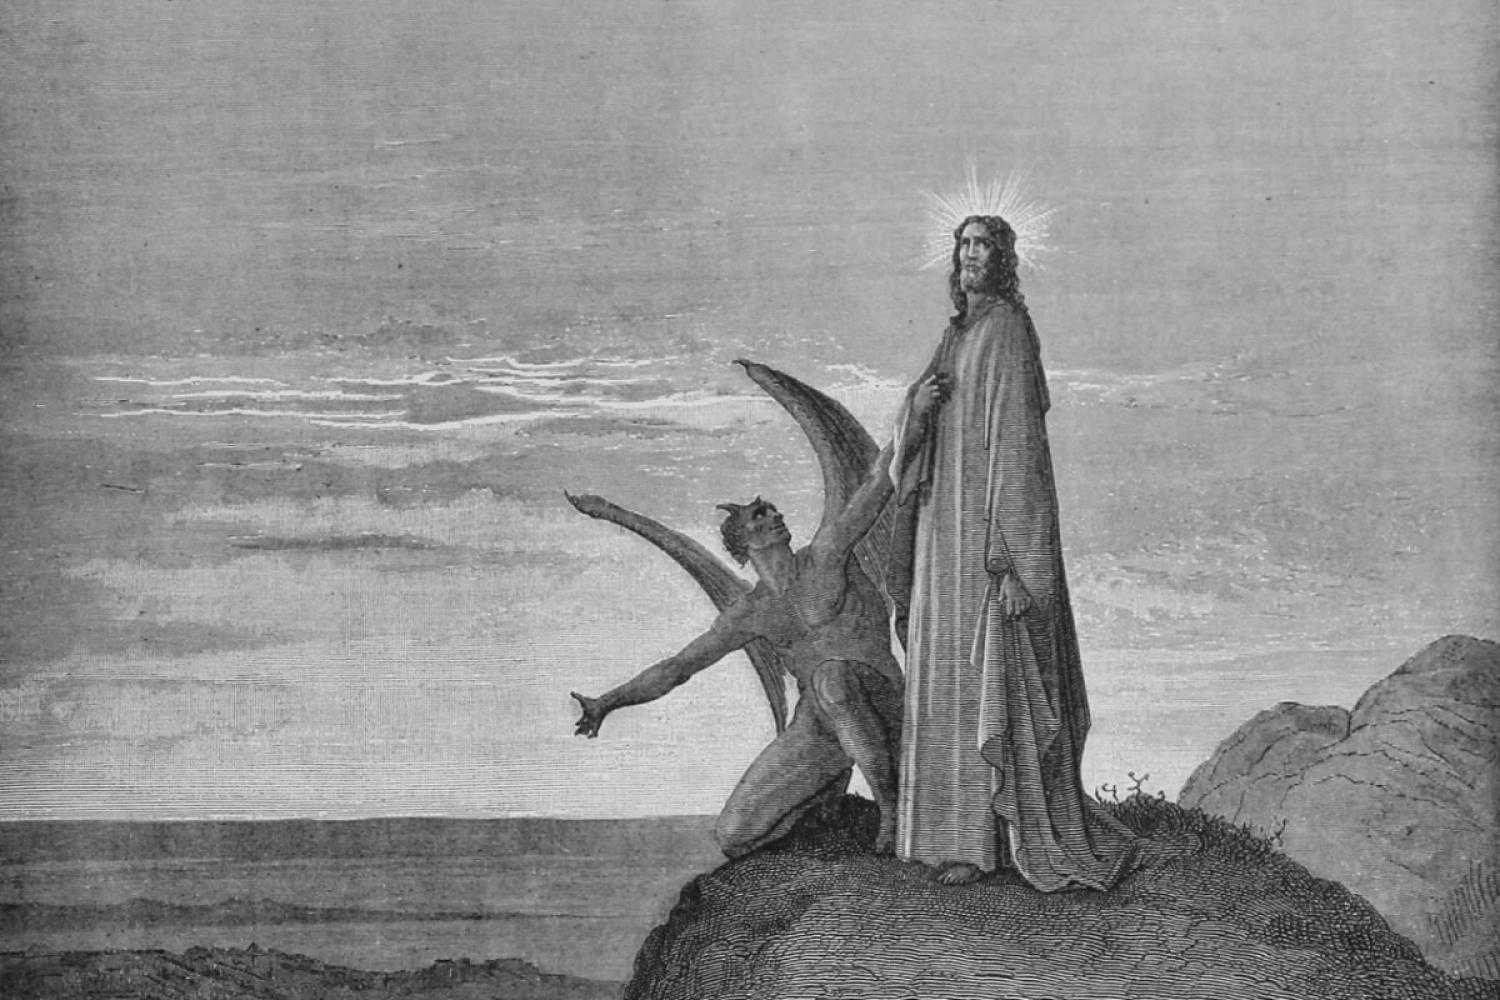 Gustave Dore's "The Temptation of Jesus"